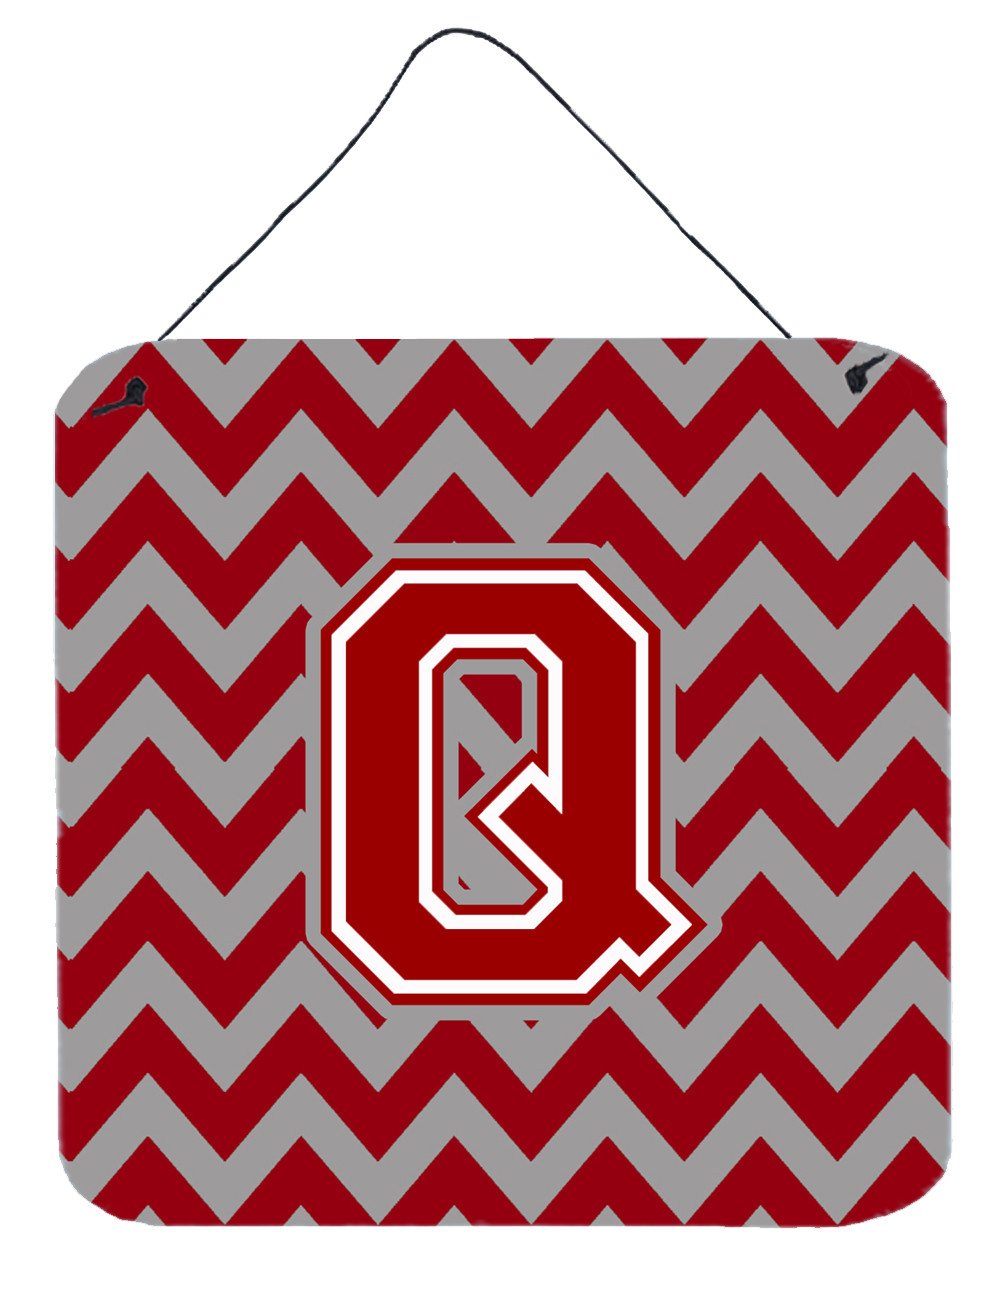 Letter Q Chevron Maroon and White Wall or Door Hanging Prints CJ1049-QDS66 by Caroline's Treasures